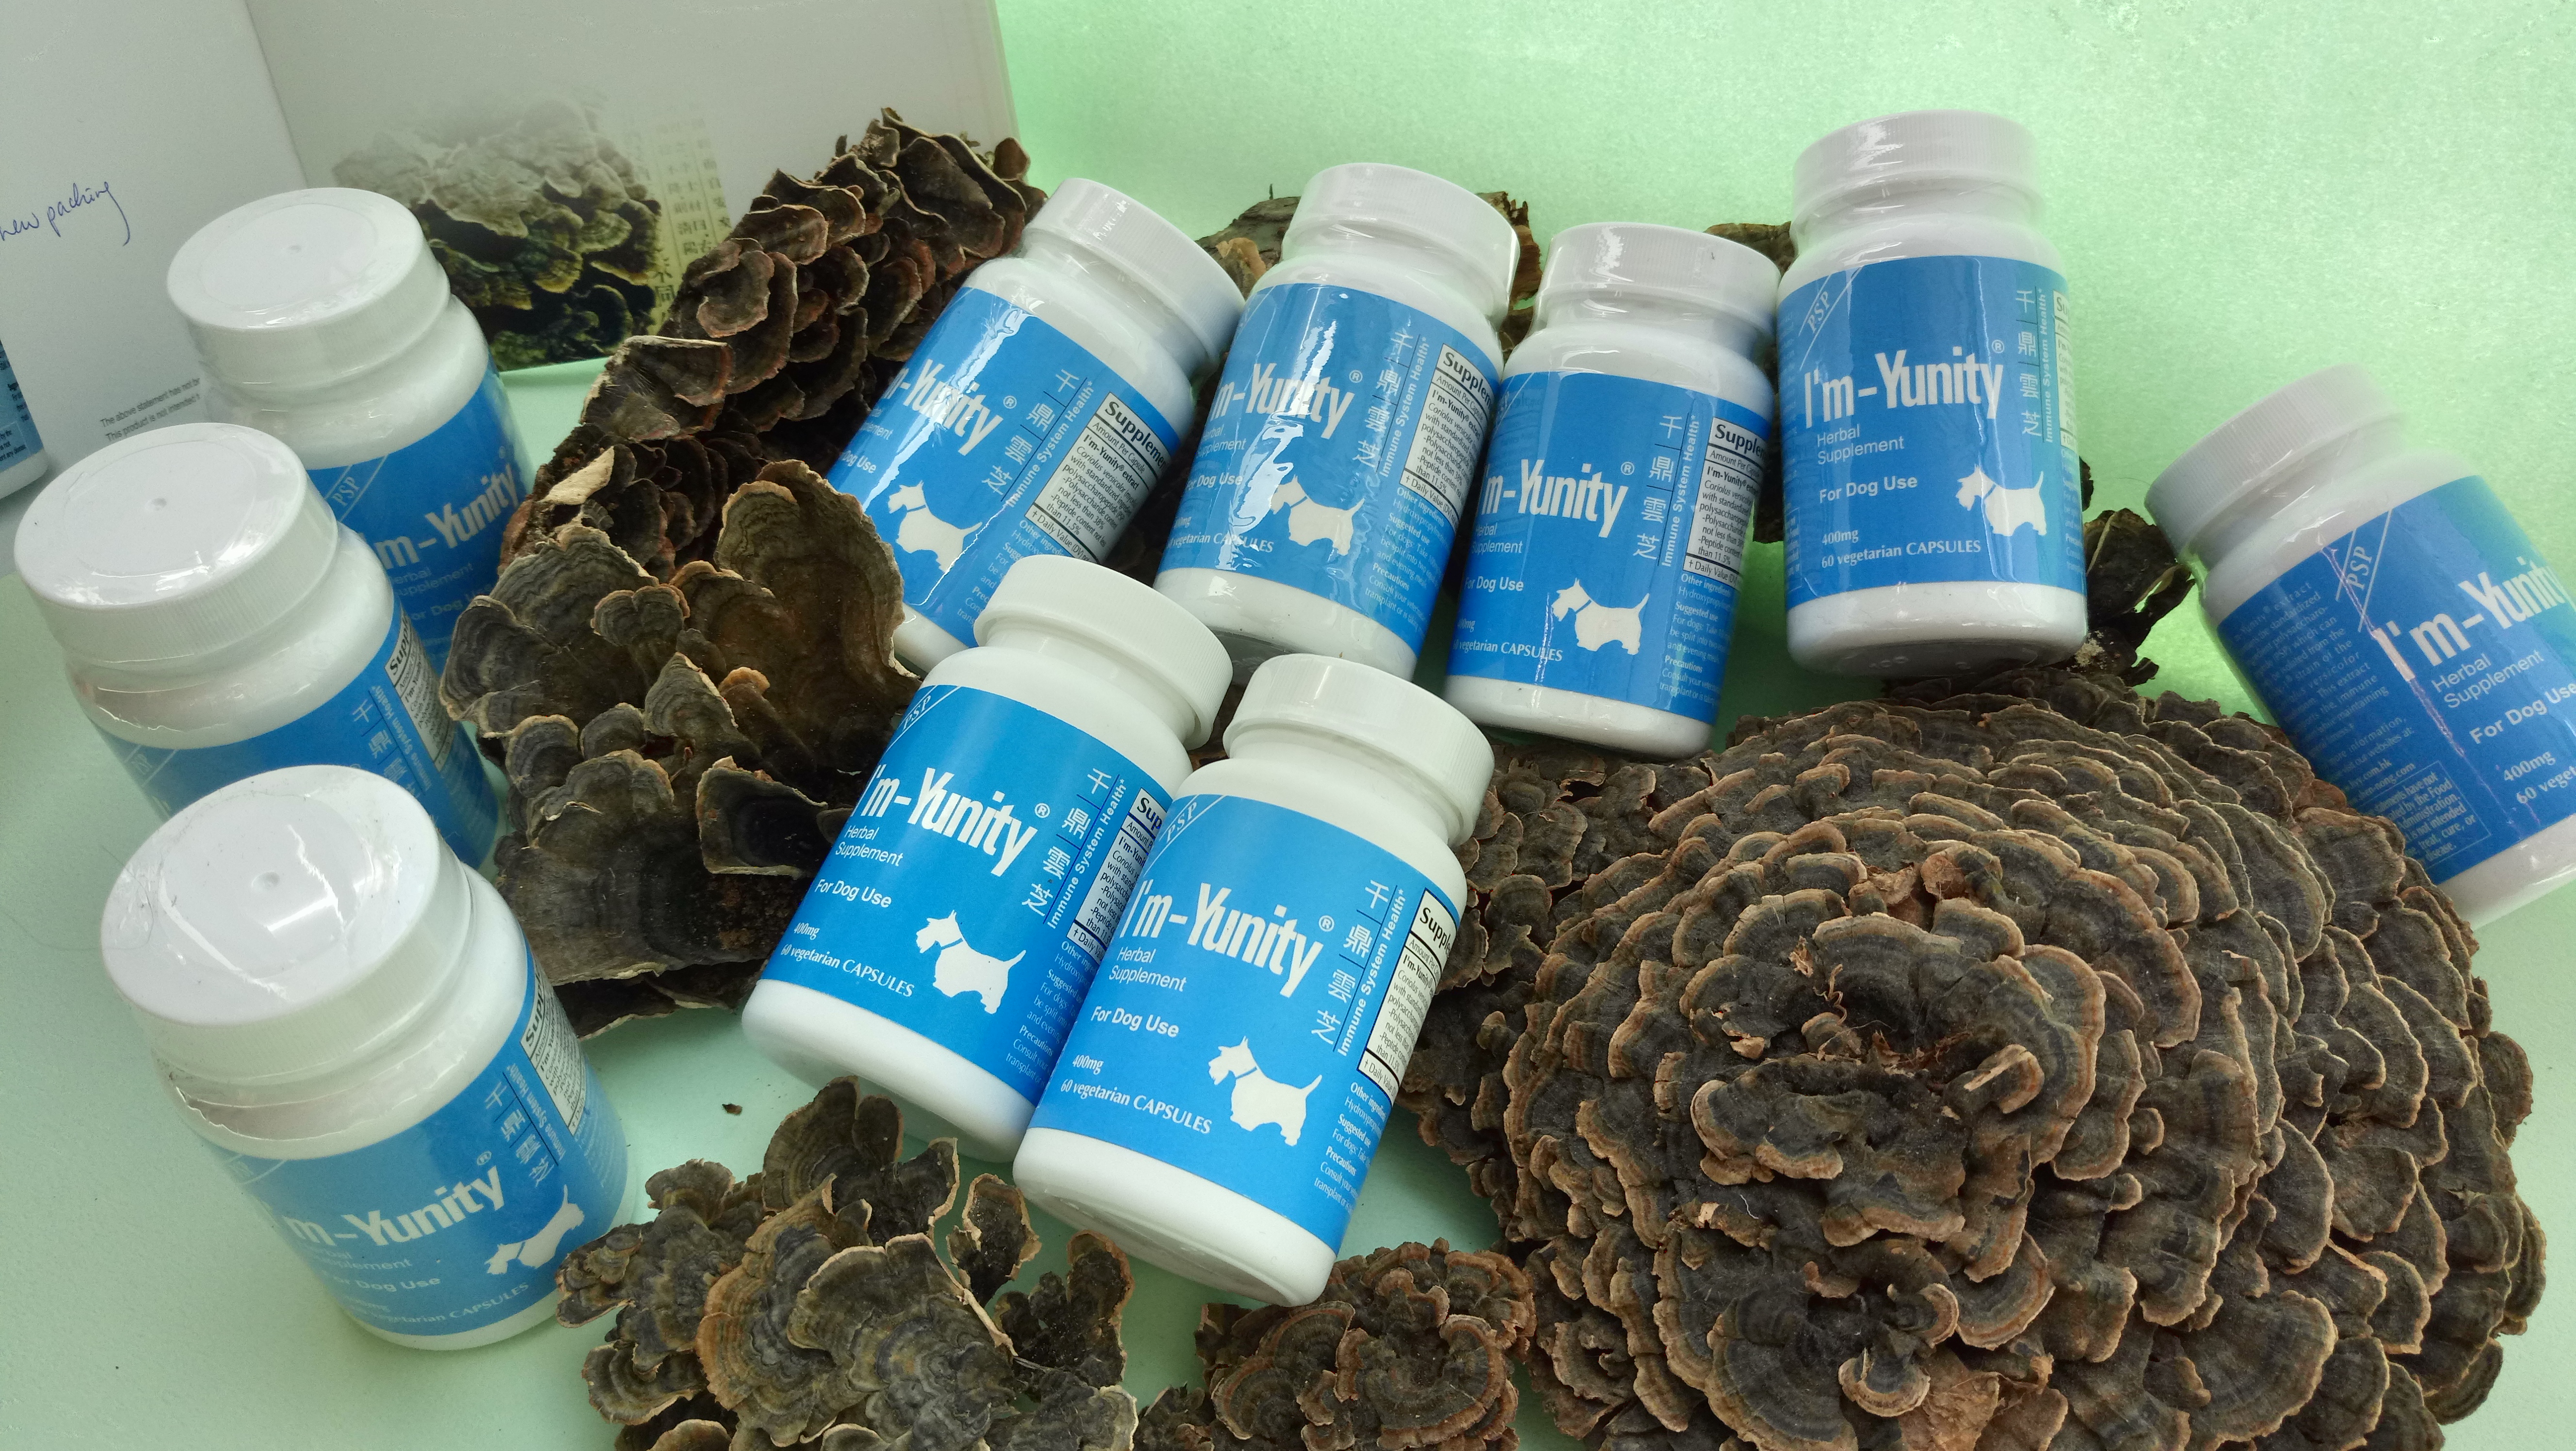 I”m-Yunity® for Dogs is a well-researched mushroom herbal supplement for dogs’ immune balance.